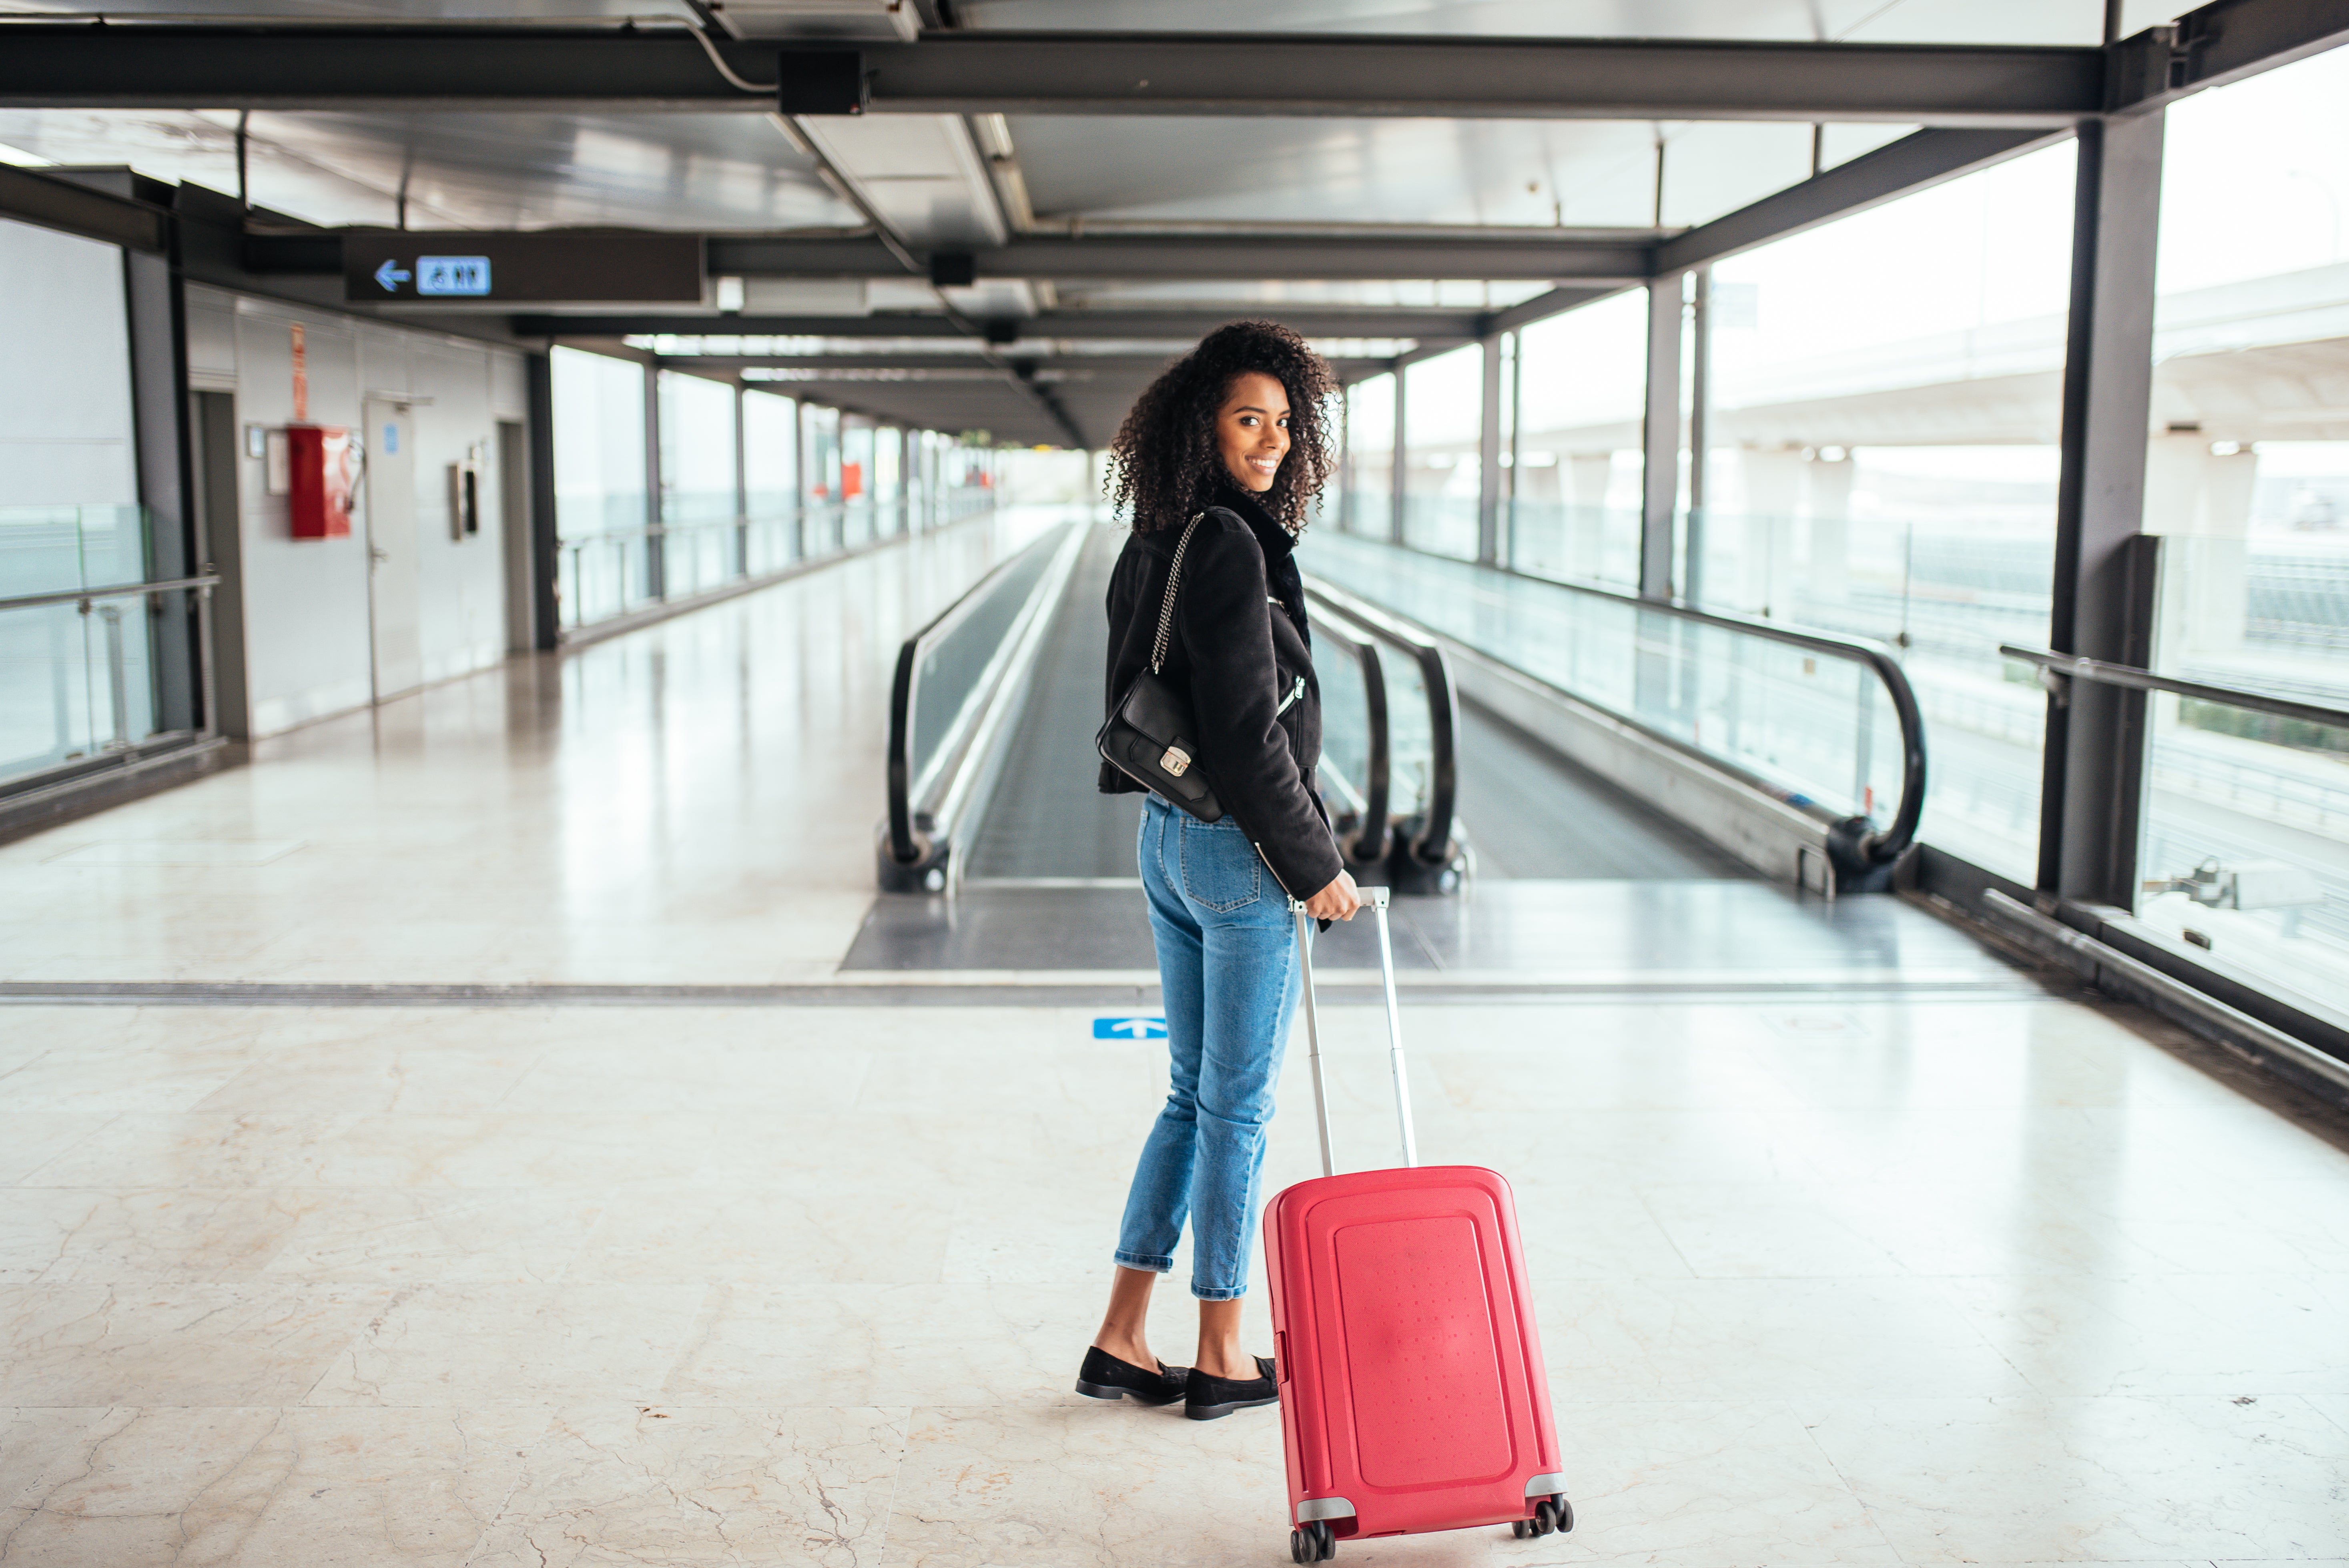 These Simple Airport Hacks Will Change Your Travel Experience Forever